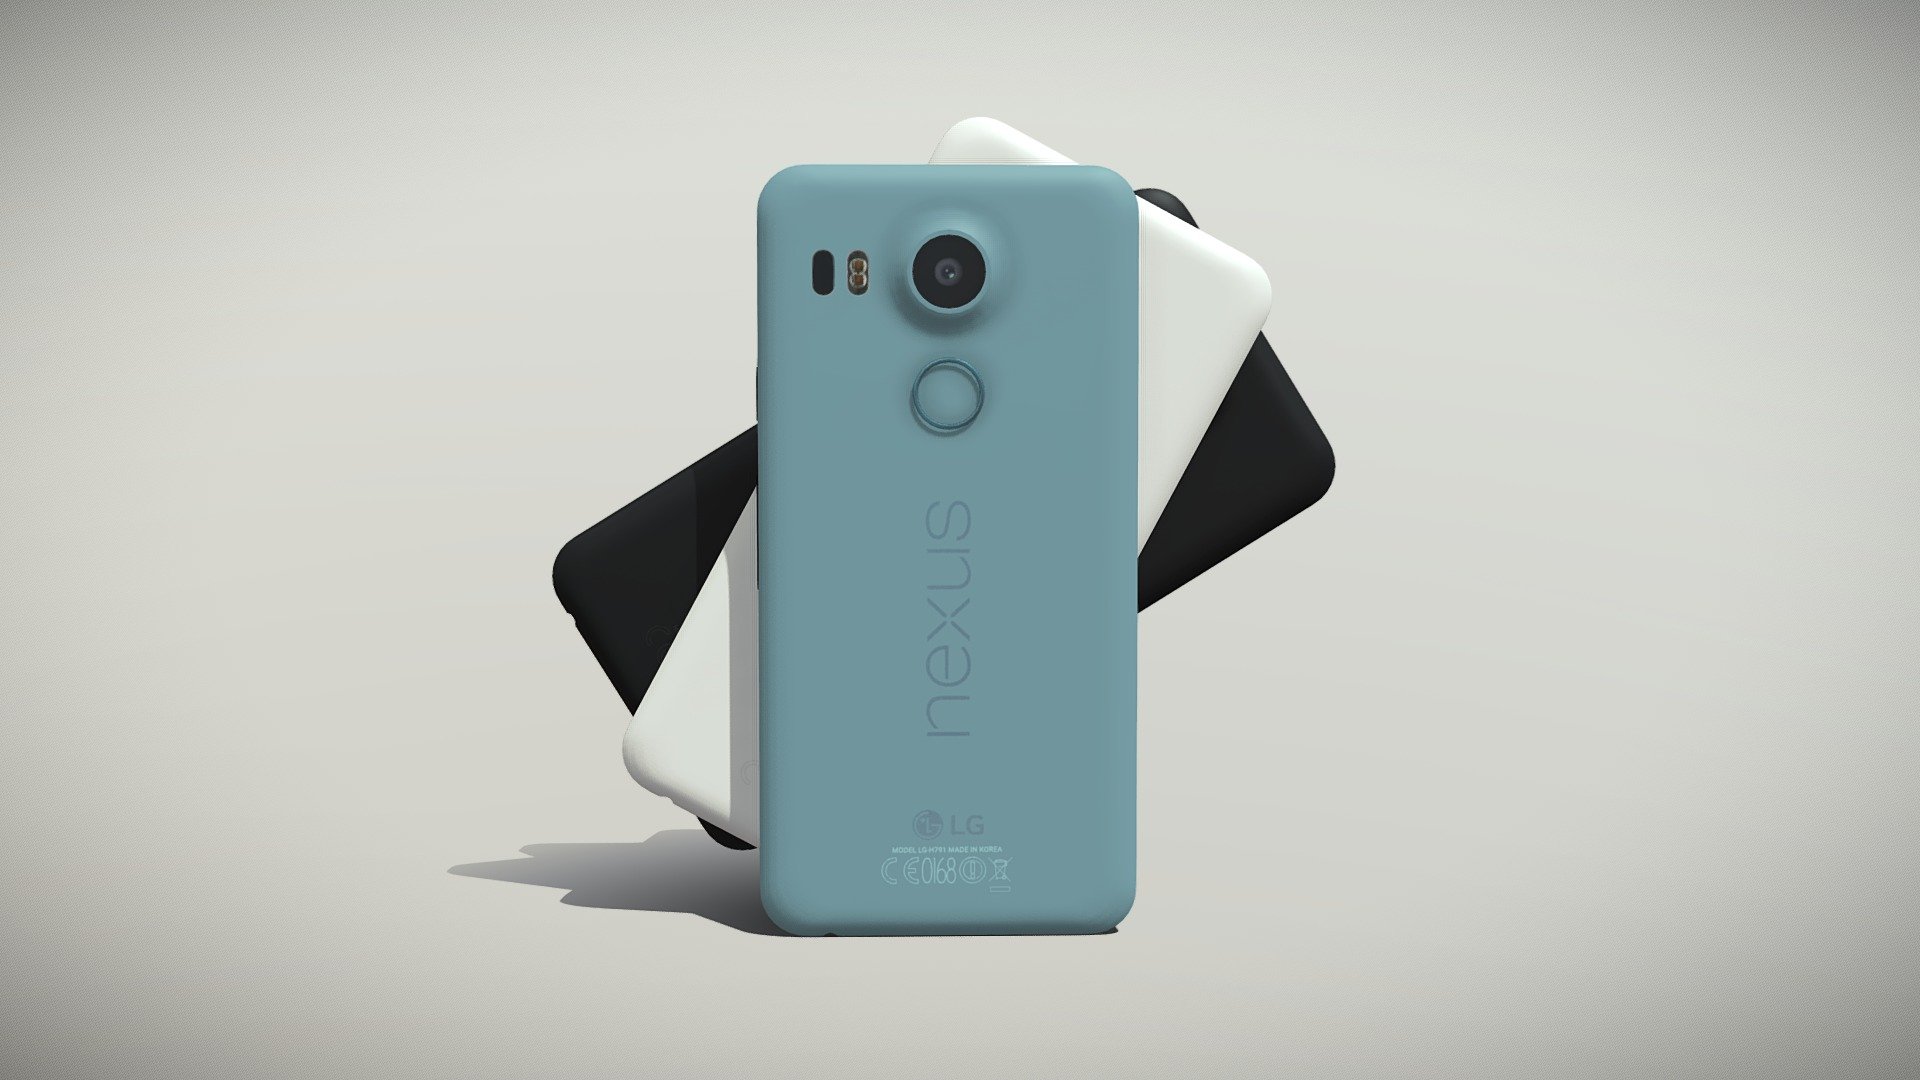 •   Let me present to you high-quality low-poly 3D model LG Nexus 5X. Model is presented in three colors: Black, Mint and White. Modeling was made with ortho-photos of real phone that is why all details of design are recreated most authentically.

•    This model consists of one mesh, it is low-polygonal and it has only one material for each color version.

•   The total of the main textures is 5. Resolution of all textures is 4096 pixels square aspect ratio in .png format. Also there is original texture file .PSD format in separate archive.

•   Polygon count of the model is – 2012.

•   The model has correct dimensions in real-world scale. All parts grouped and named correctly.

•   To use the model in other 3D programs there are scenes saved in formats .fbx, .obj, .DAE, .max (2010 version).

Note: If you see some artifacts on the textures, it means compression works in the Viewer. We recommend setting HD quality for textures. But anyway, original textures have no artifacts 3d model